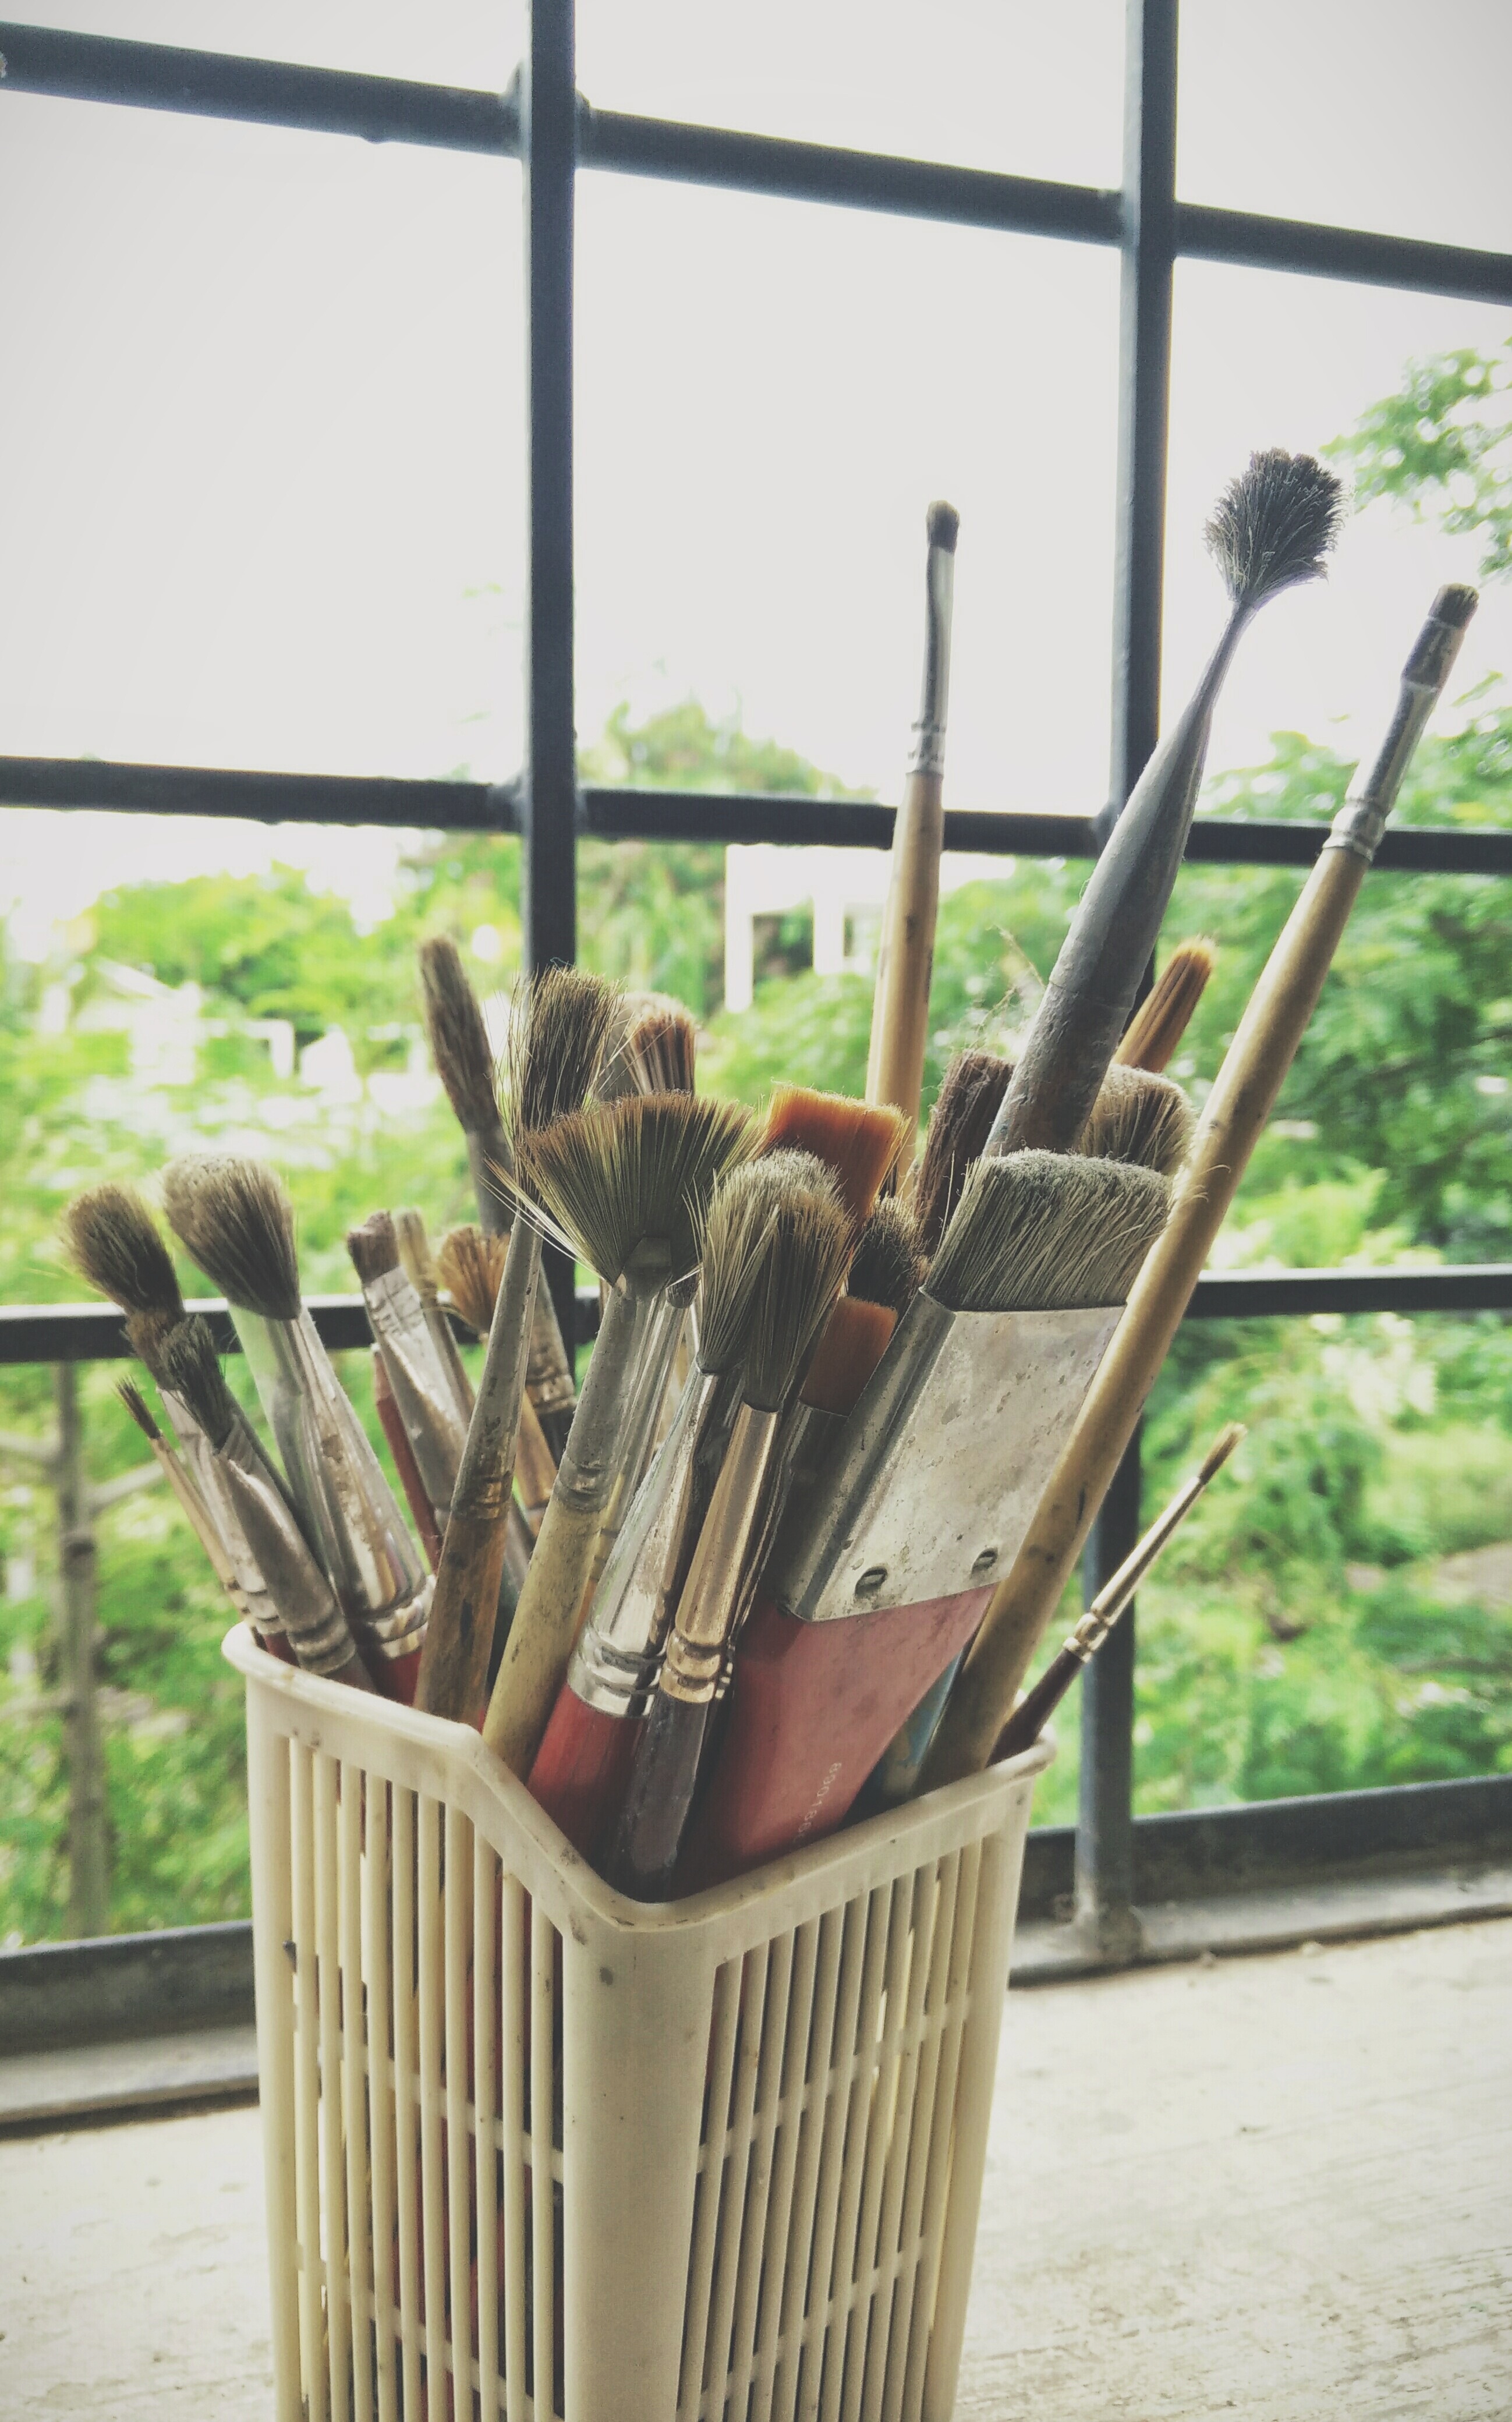 assorted paint brushes in white plastic holder